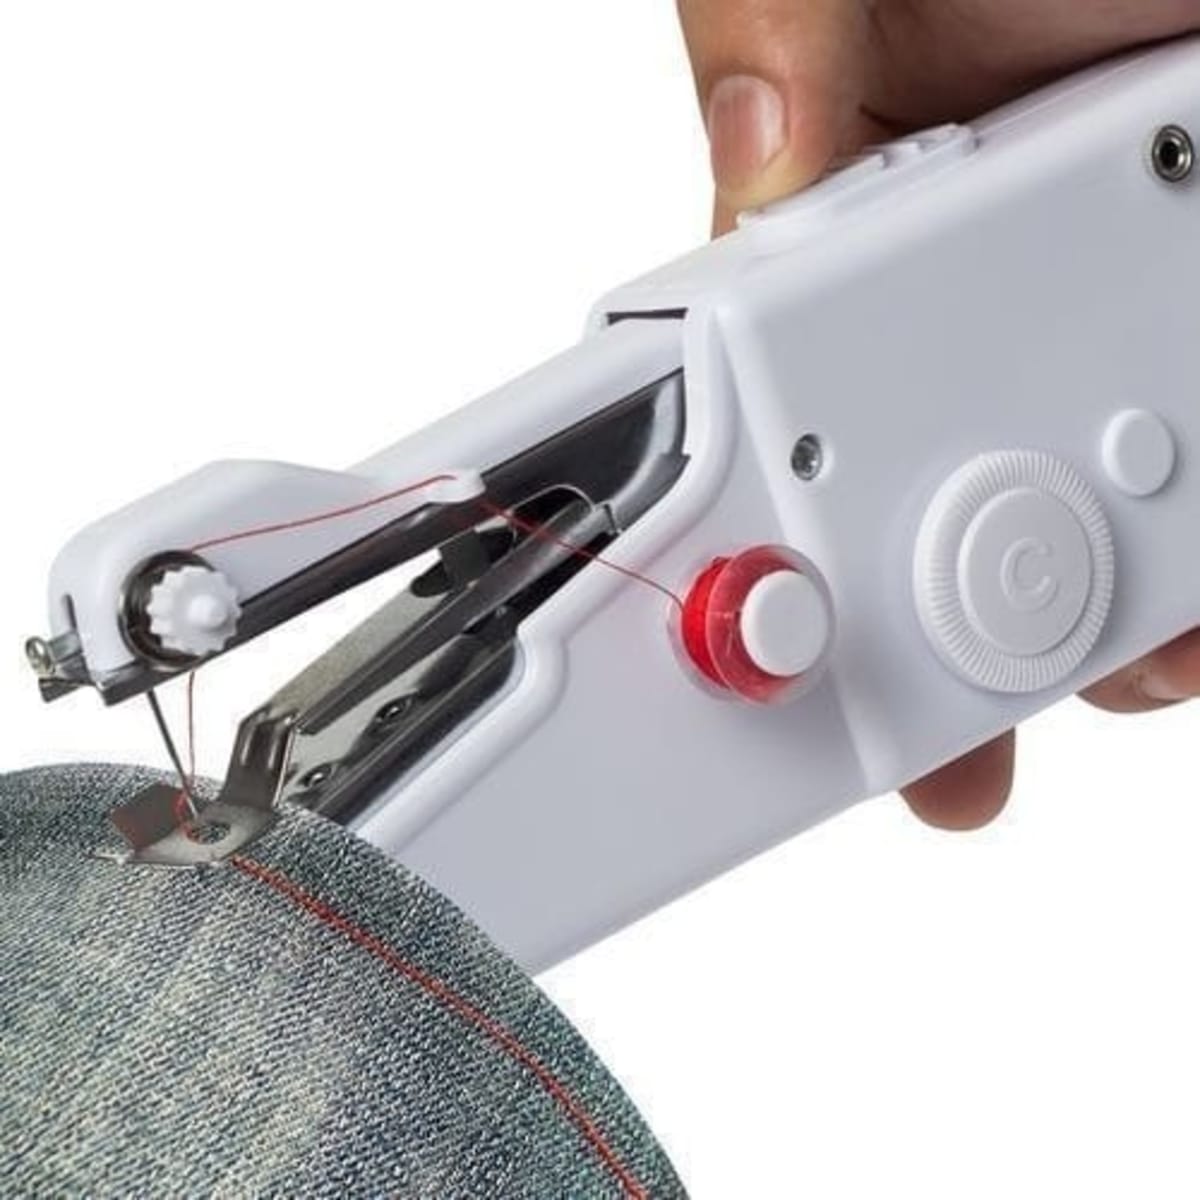 Small Hand Sewing Machine Portable Mini Sewing Machine Hand Sewing Tool